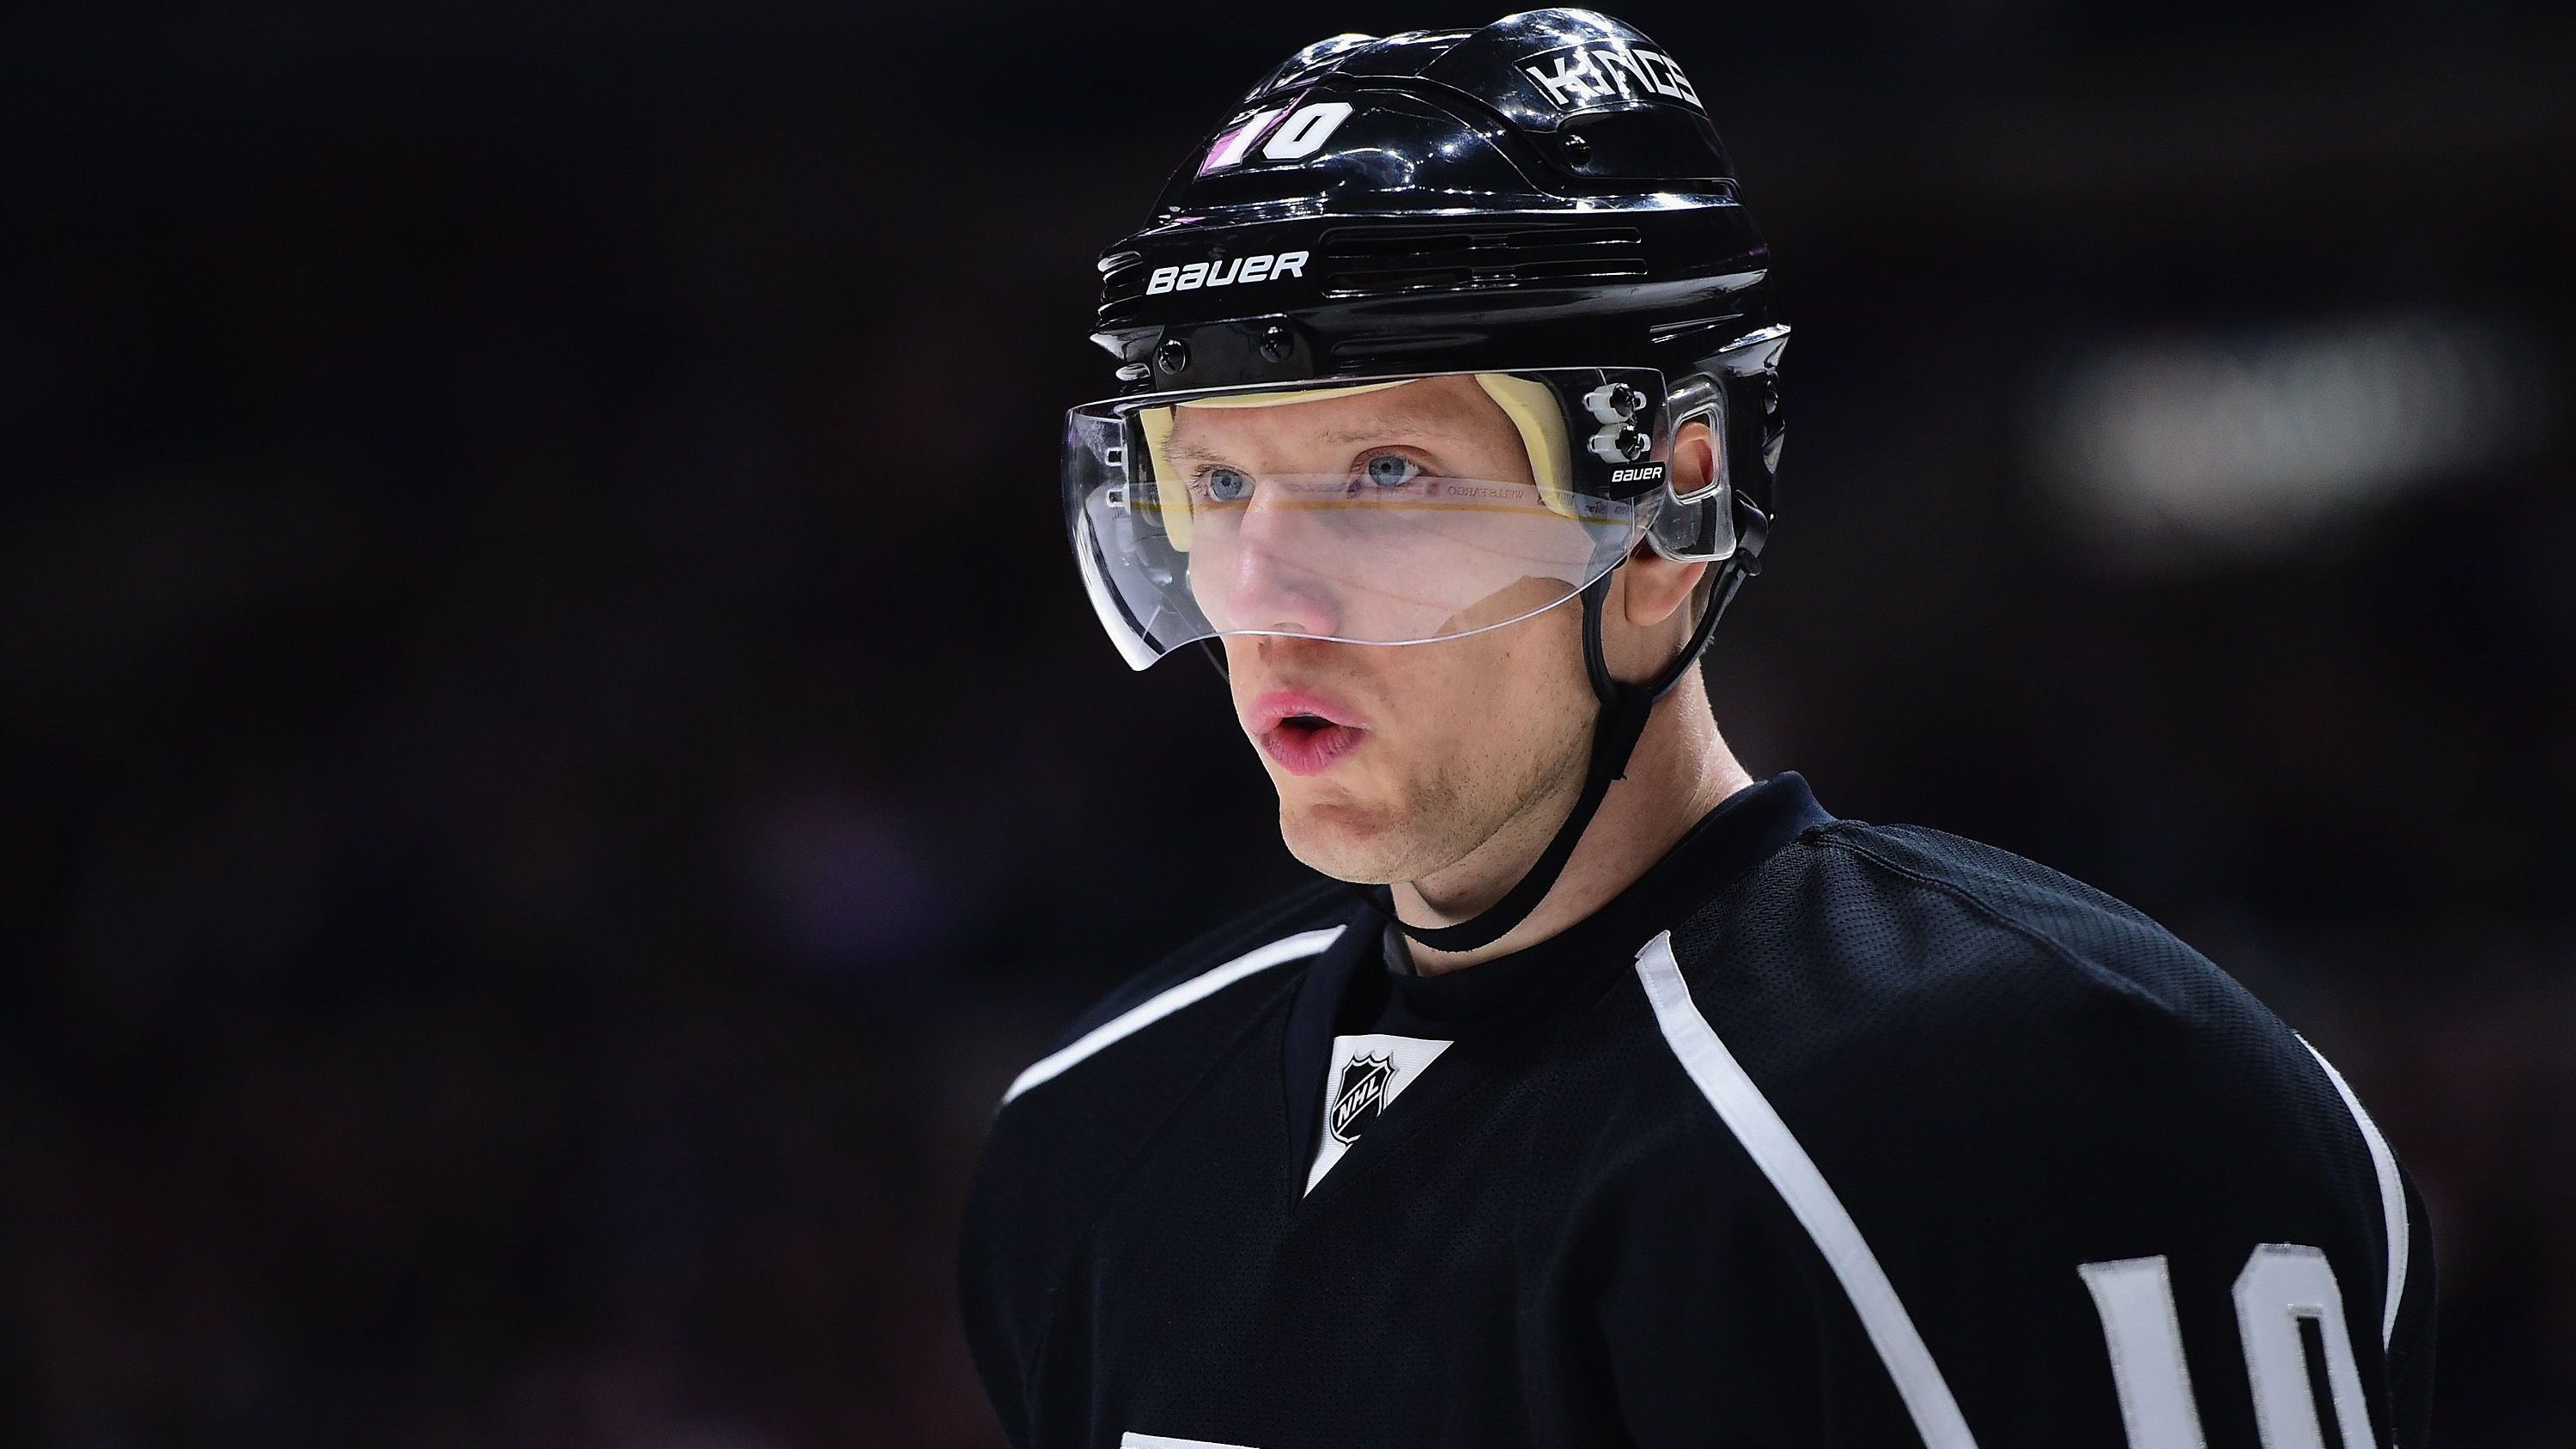 <strong>Platz 6: Christian Ehrhoff (NHL)</strong><br><strong>Verdienst:</strong> 46 Millionen Euro <br><strong>Spielzeiten:</strong> 12